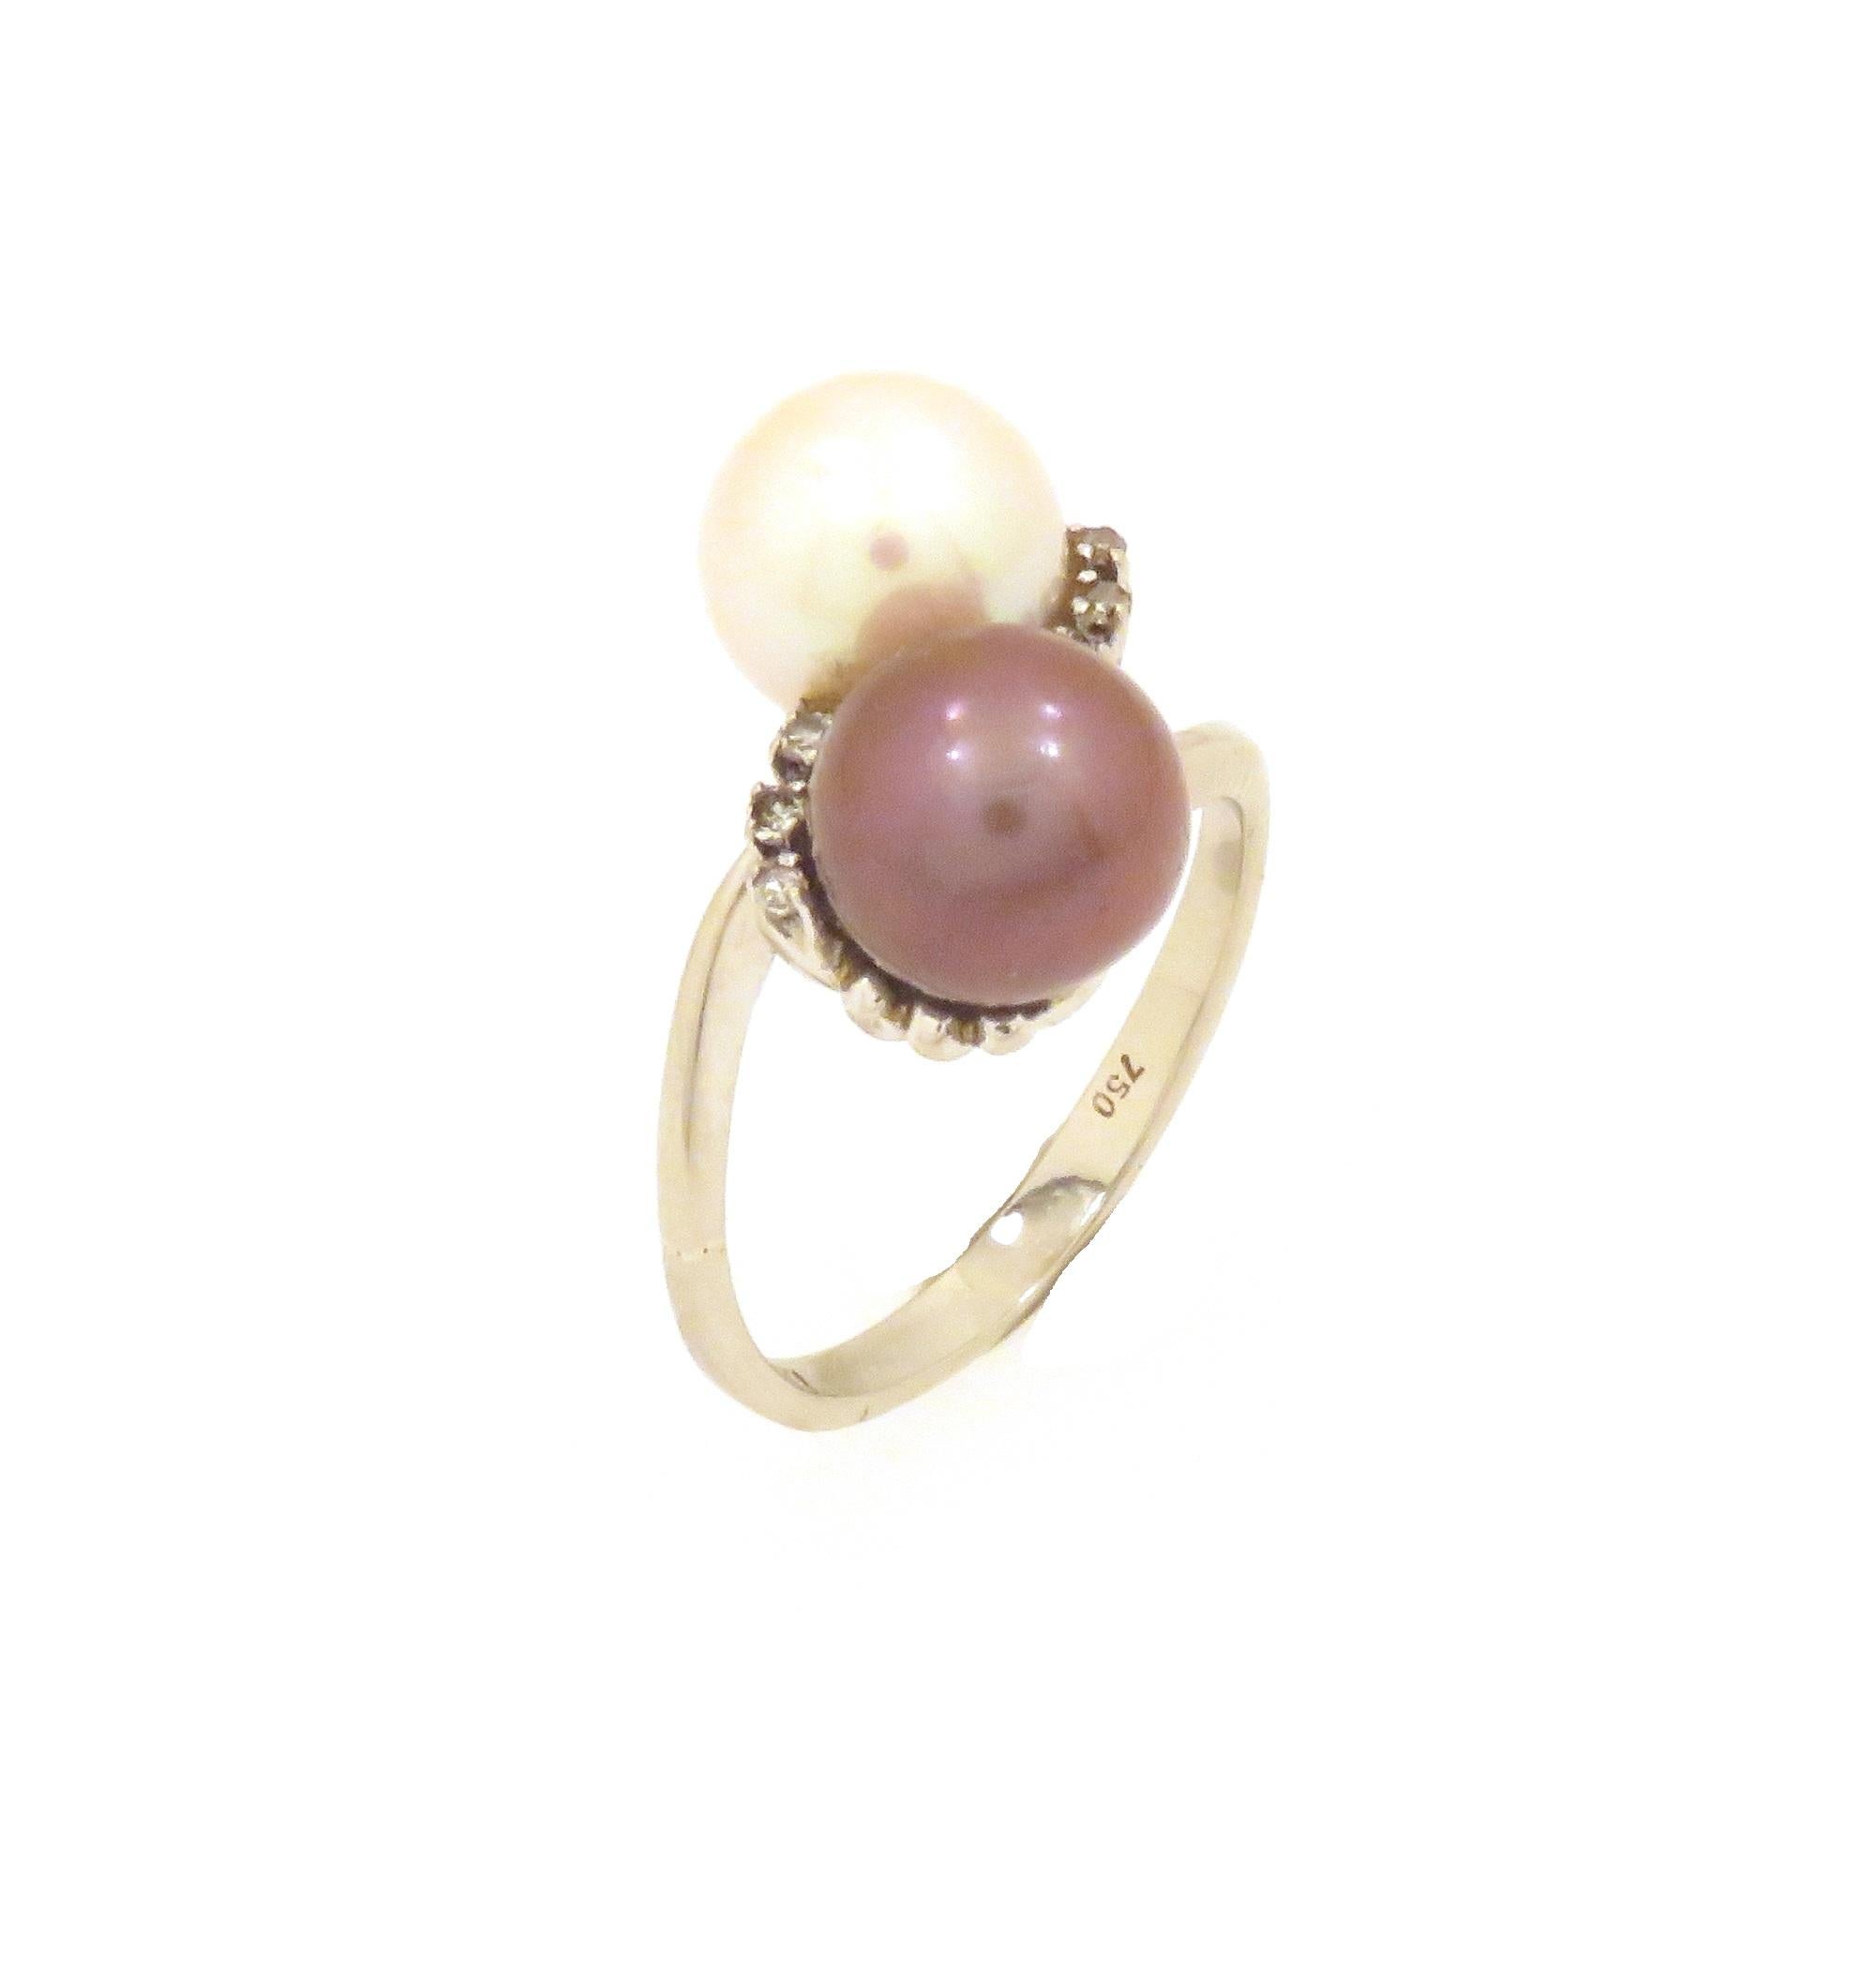 Diamonds Pearls 18 Karat White Gold Vintage Ring Handcrafted in Italy For Sale 2